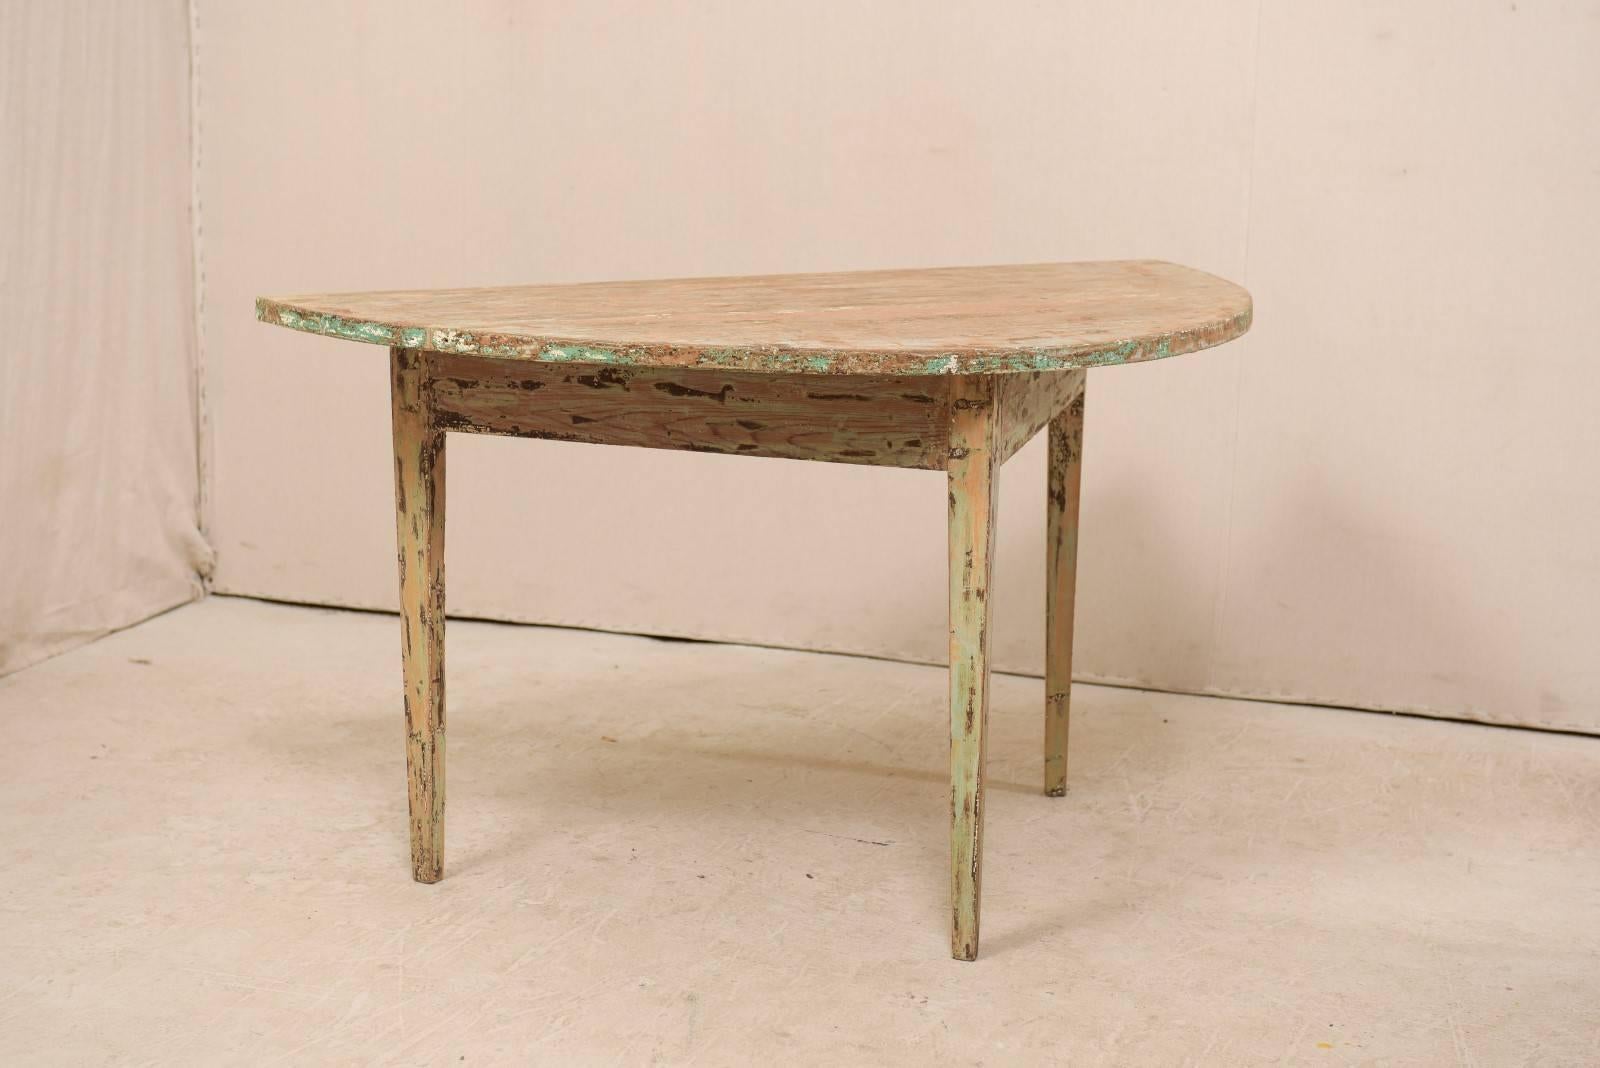 Pair of 19th Century Swedish Painted Wood Demilune Tables 1